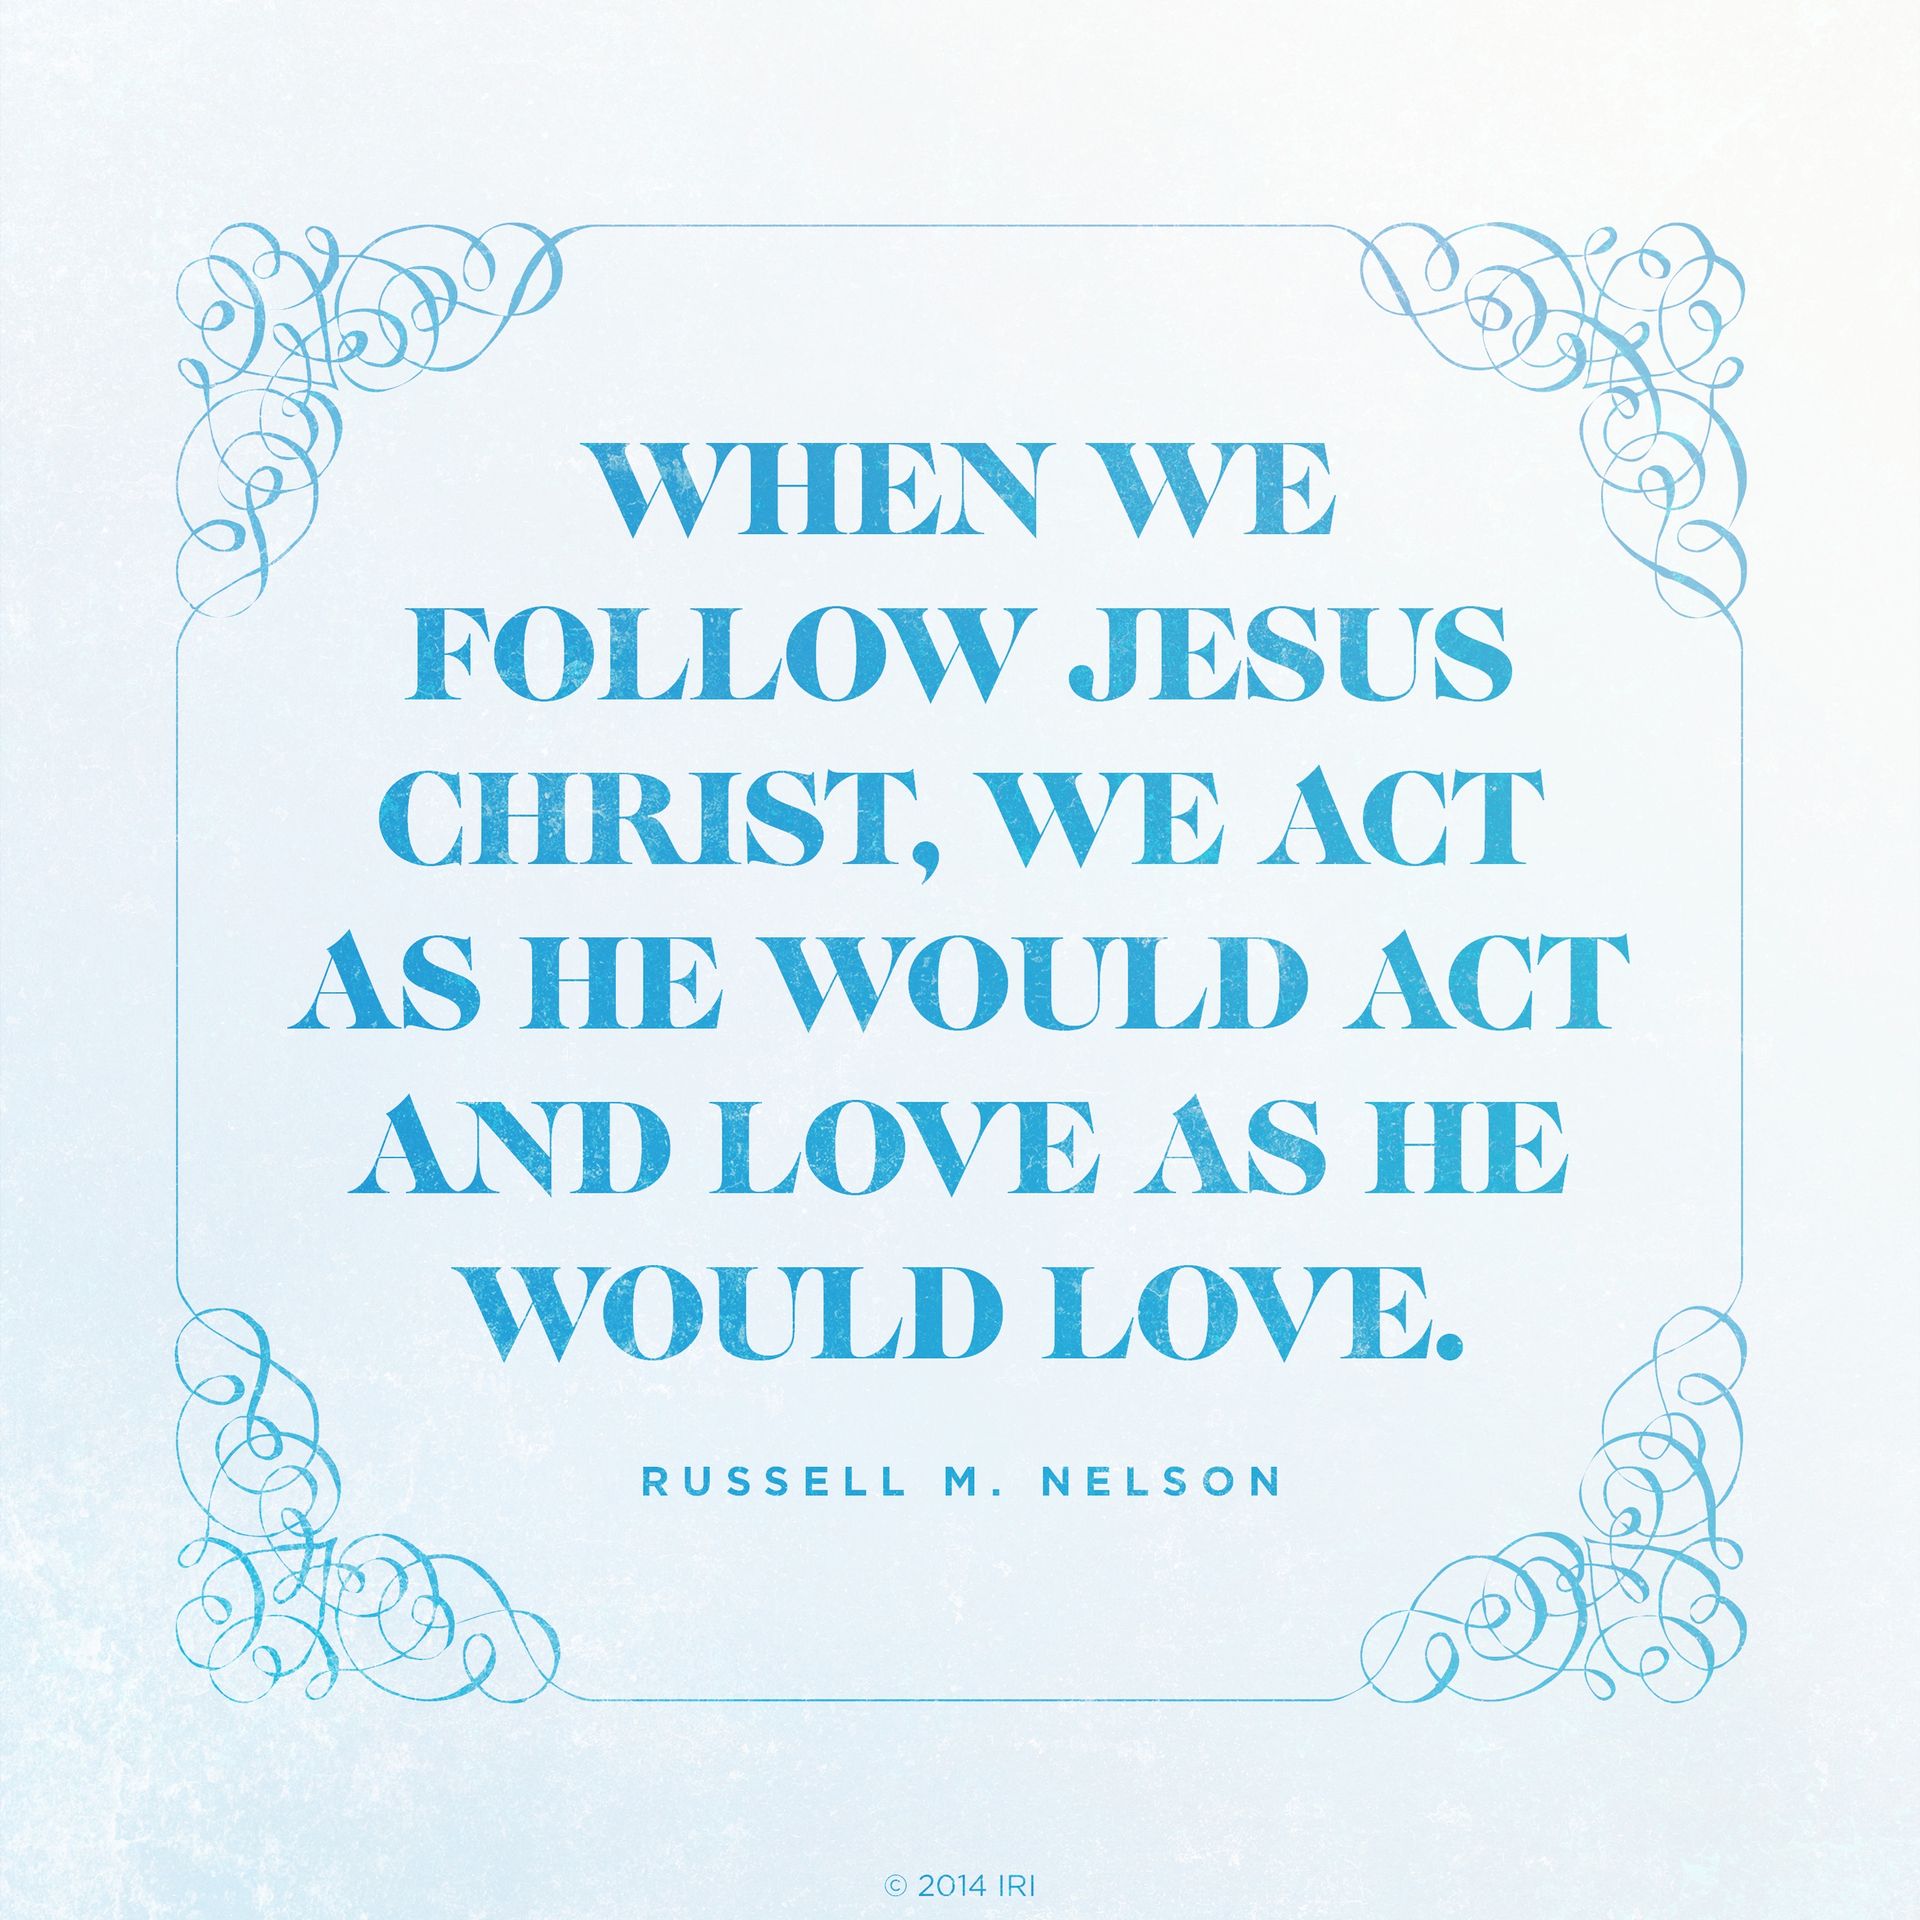 “When we follow Jesus Christ, we act as He would act and love as He would love.”—President Russell M. Nelson, “The Work of Salvation: Parable of a Father at Bedtime”